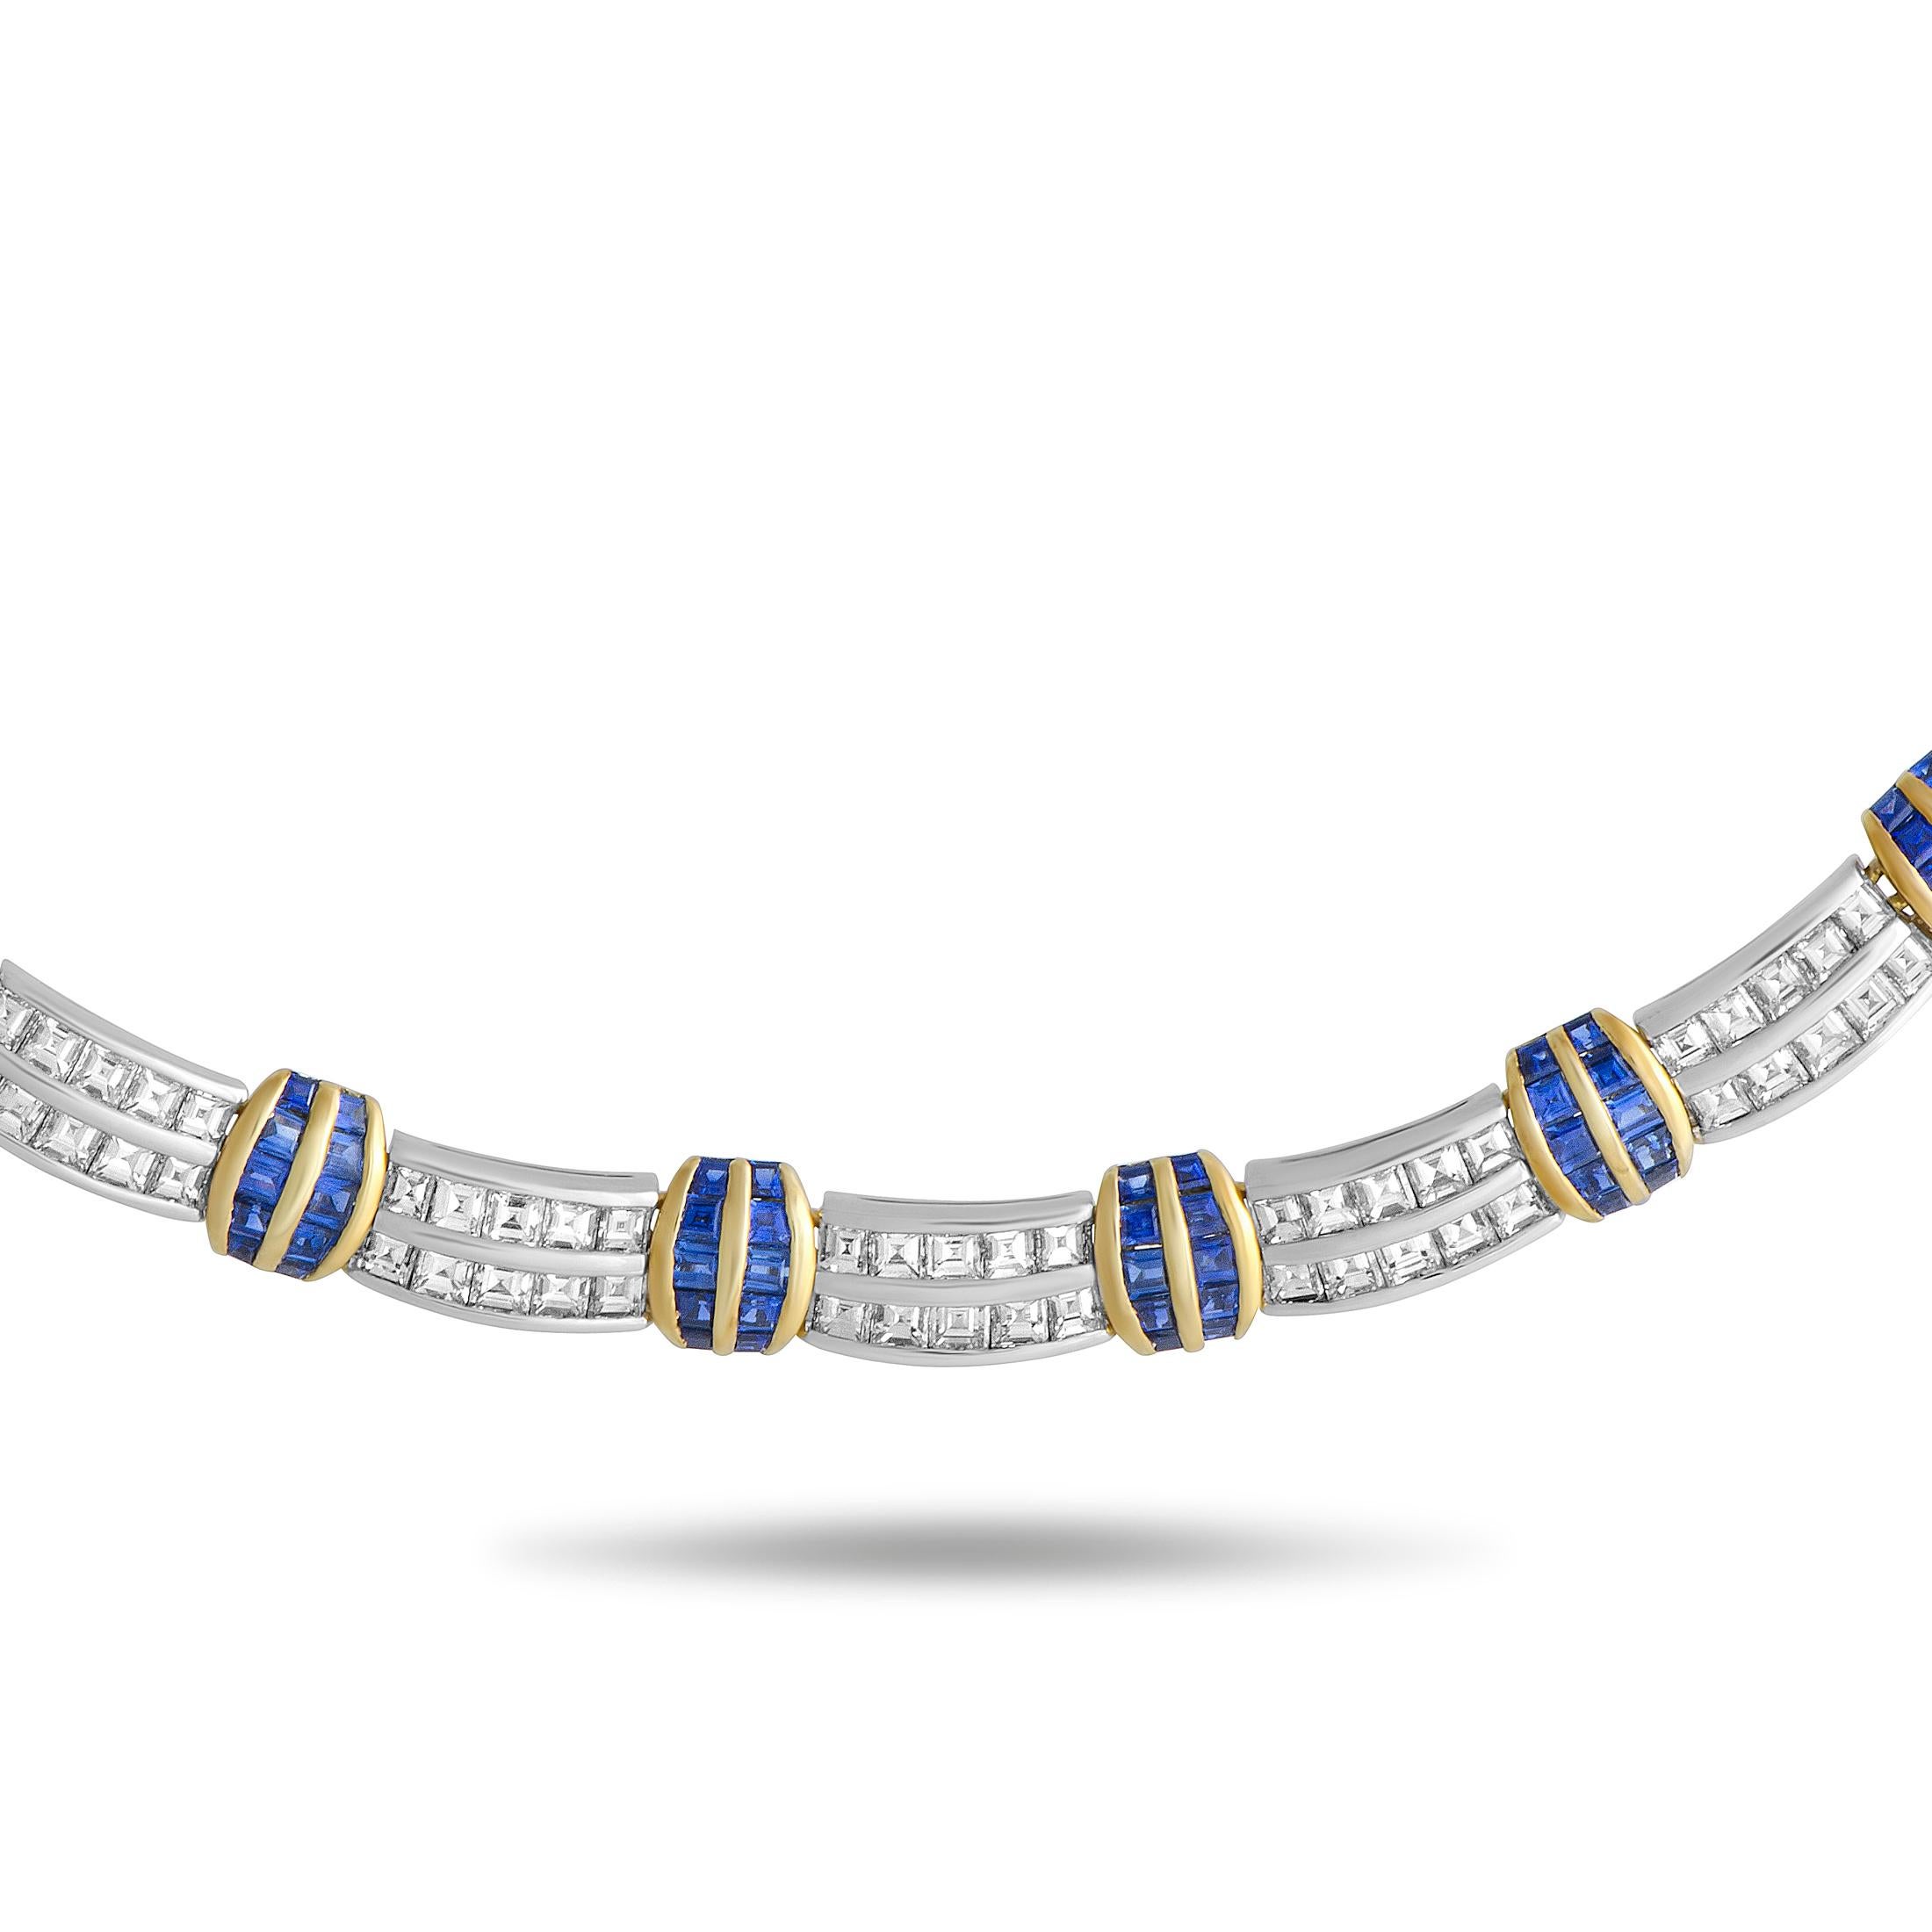 Sophisticated prestige and elegance are embodied in this fascinating jewelry piece from Picchiotti that boasts an exceptionally refined design topped off with a resplendent blend of expertly cut gems. The necklace is beautifully made of 18K white